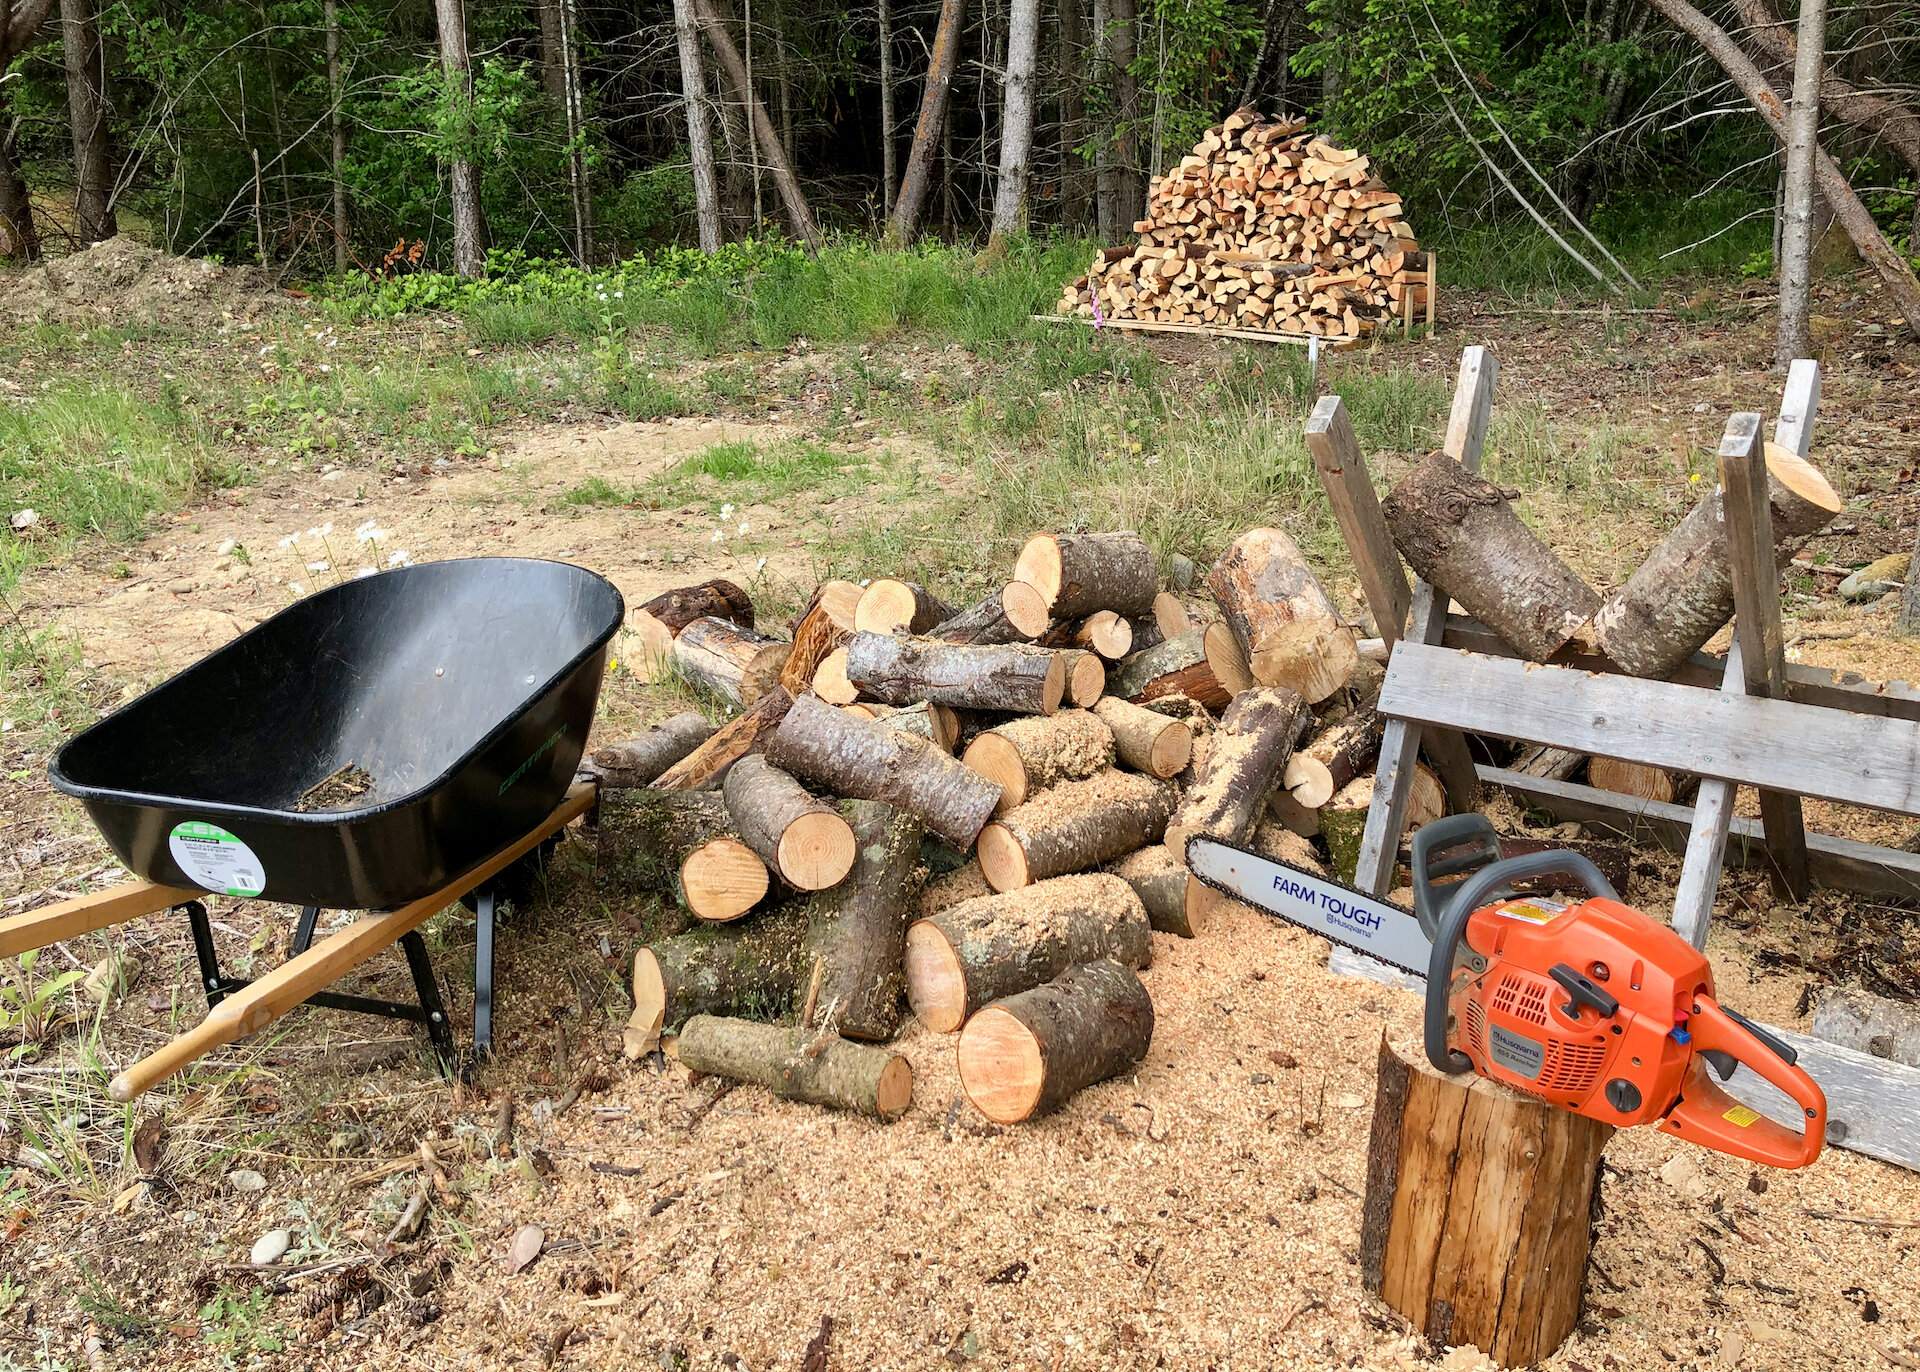  It was a busy day, but I got through quite a lot of it. We’ve got more wood than we’ll need all winter I’m sure. 